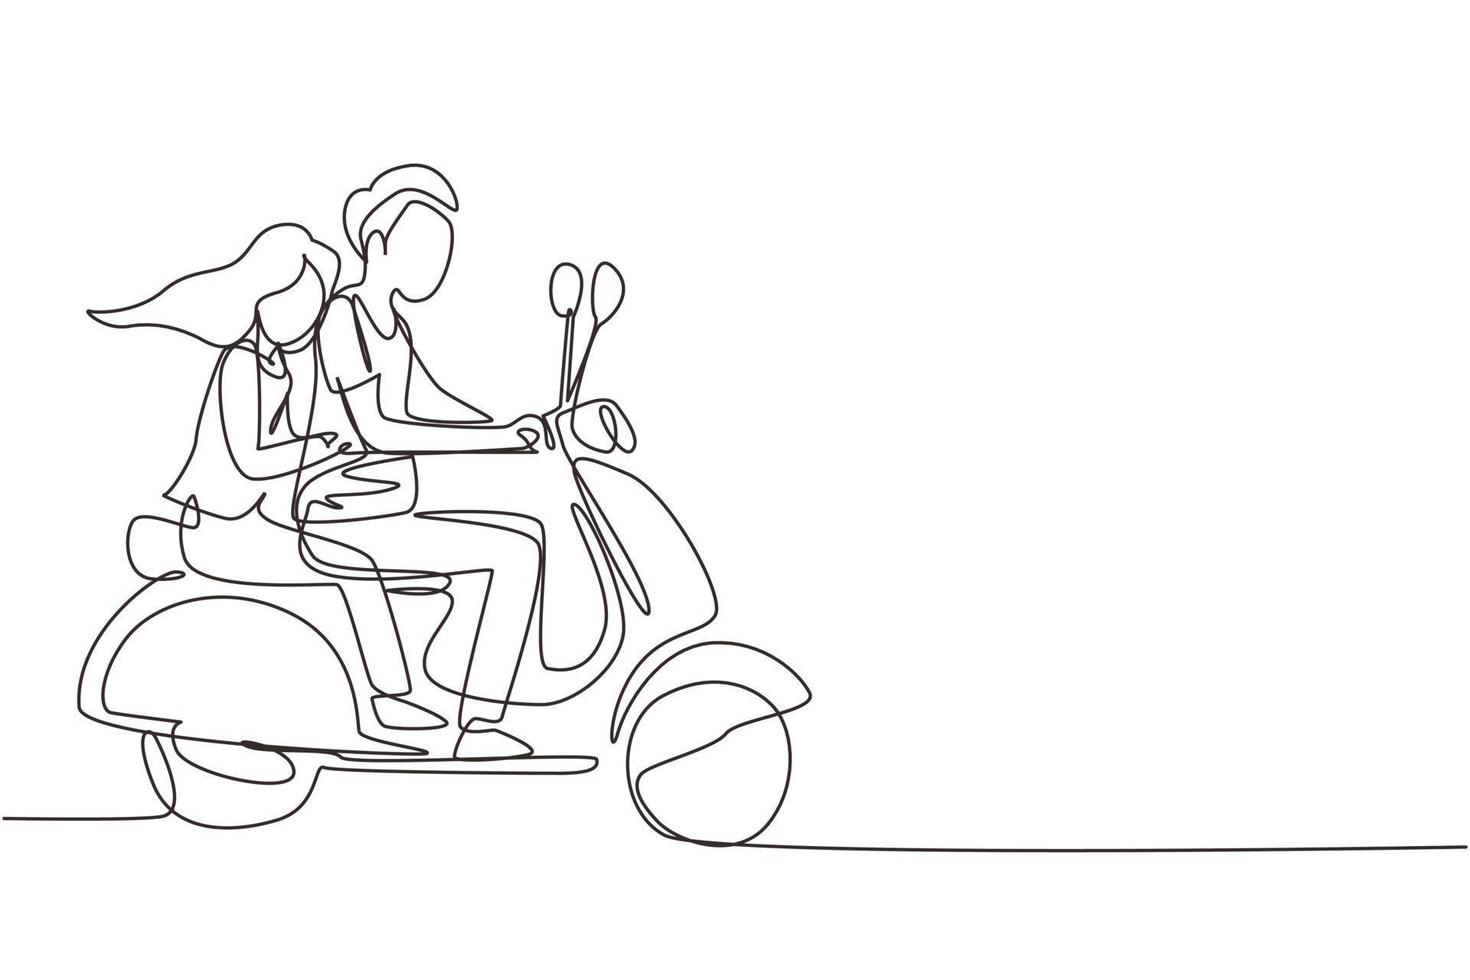 Continuous one line drawing couple riding motorcycle. Man driving scooter and woman are passenger while hugging. Driving around city. Drive safely. Single line draw design vector graphic illustration